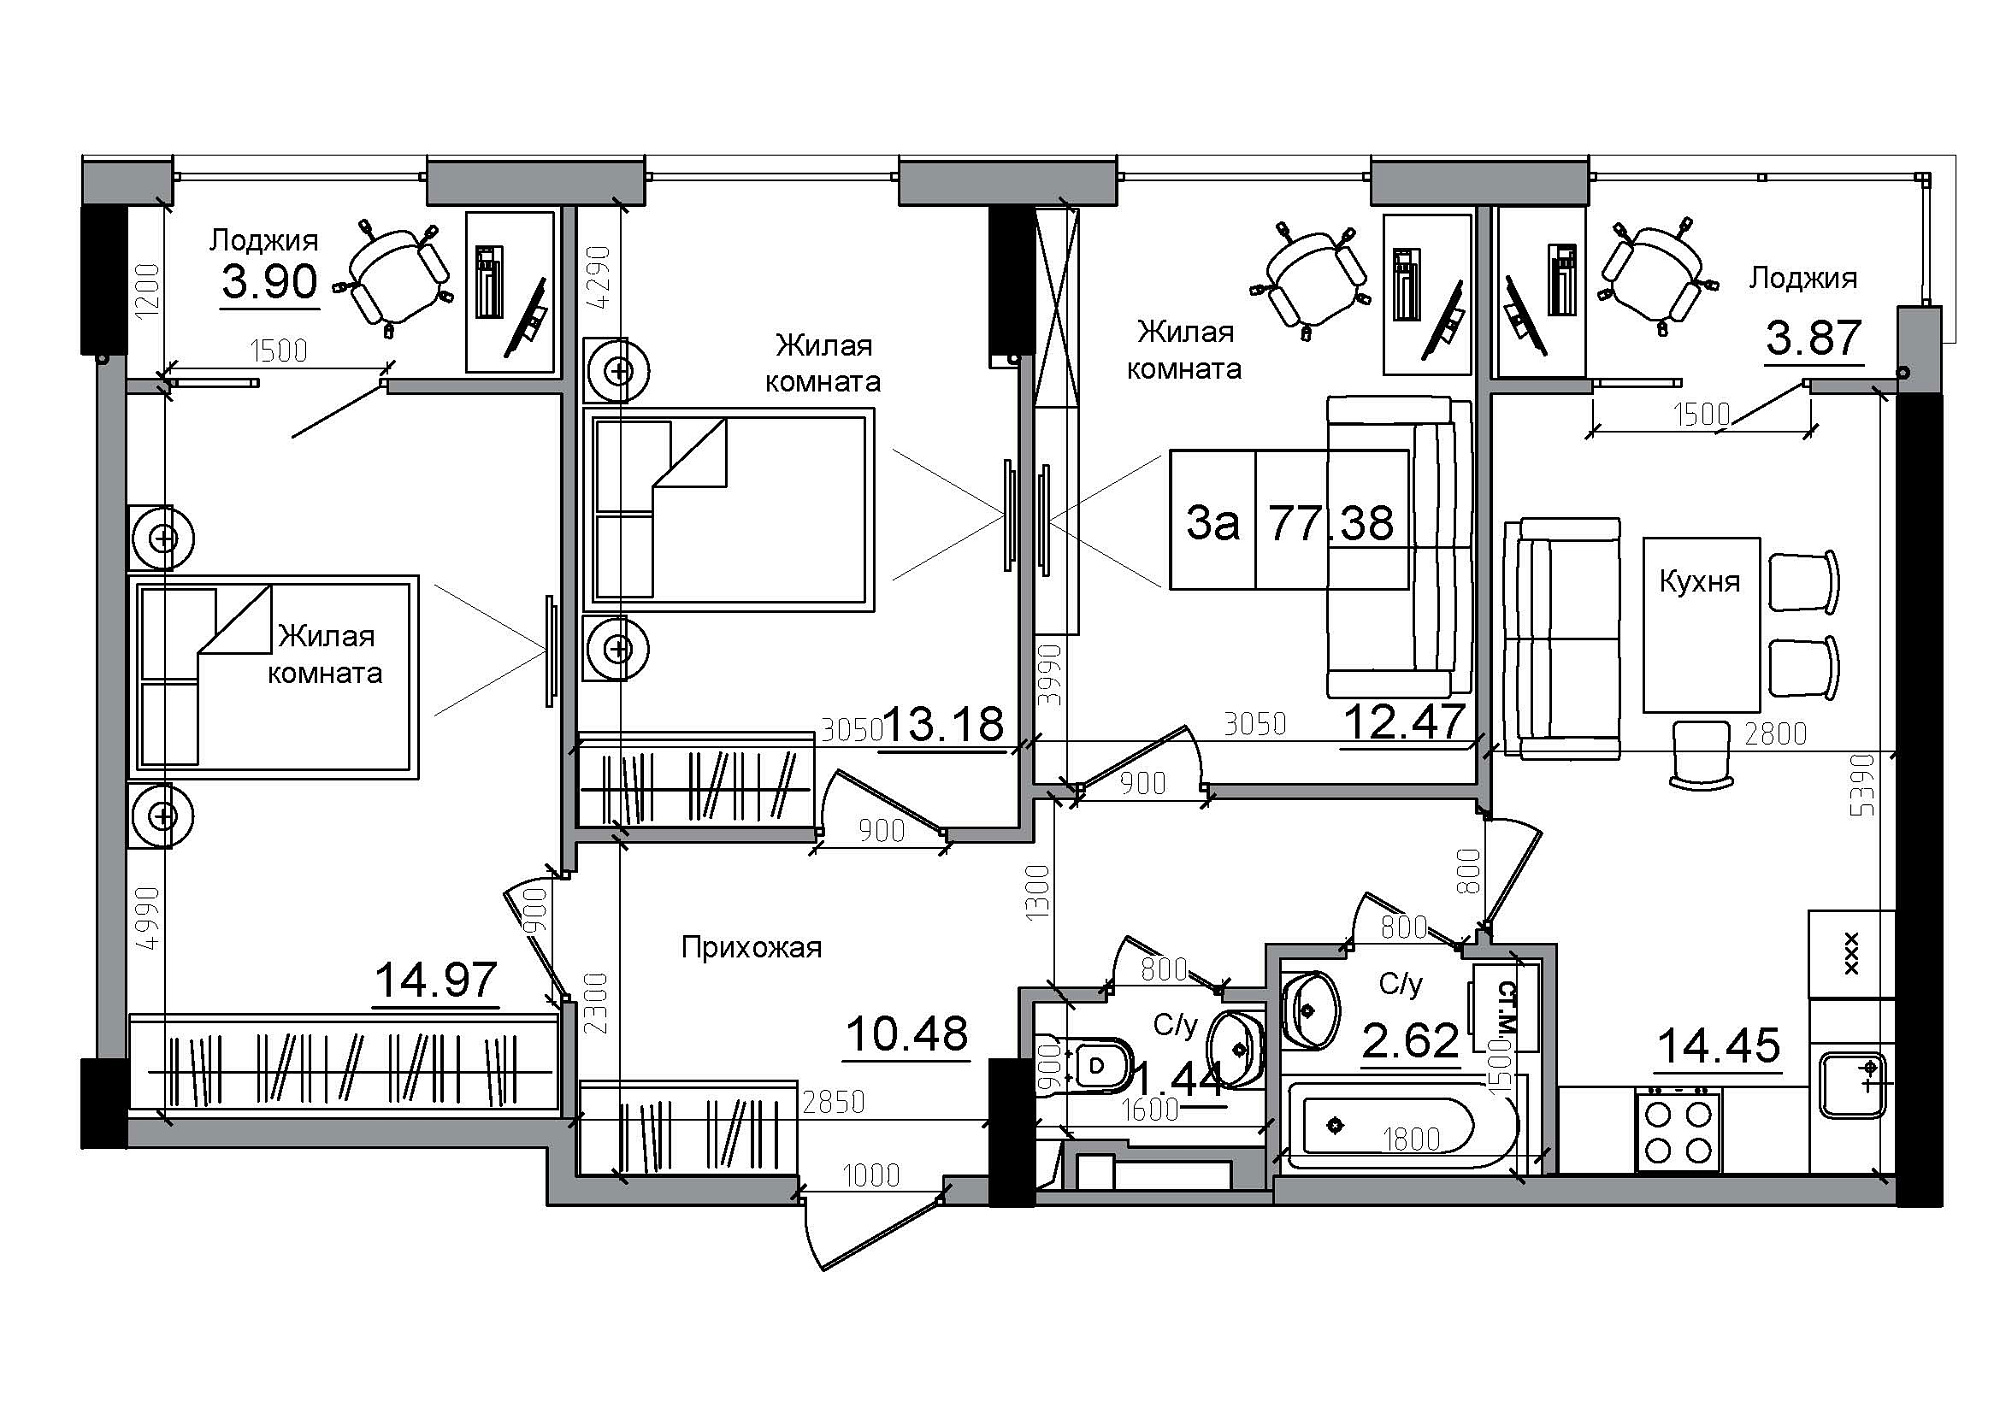 Planning 3-rm flats area 77.38m2, AB-12-12/00010.